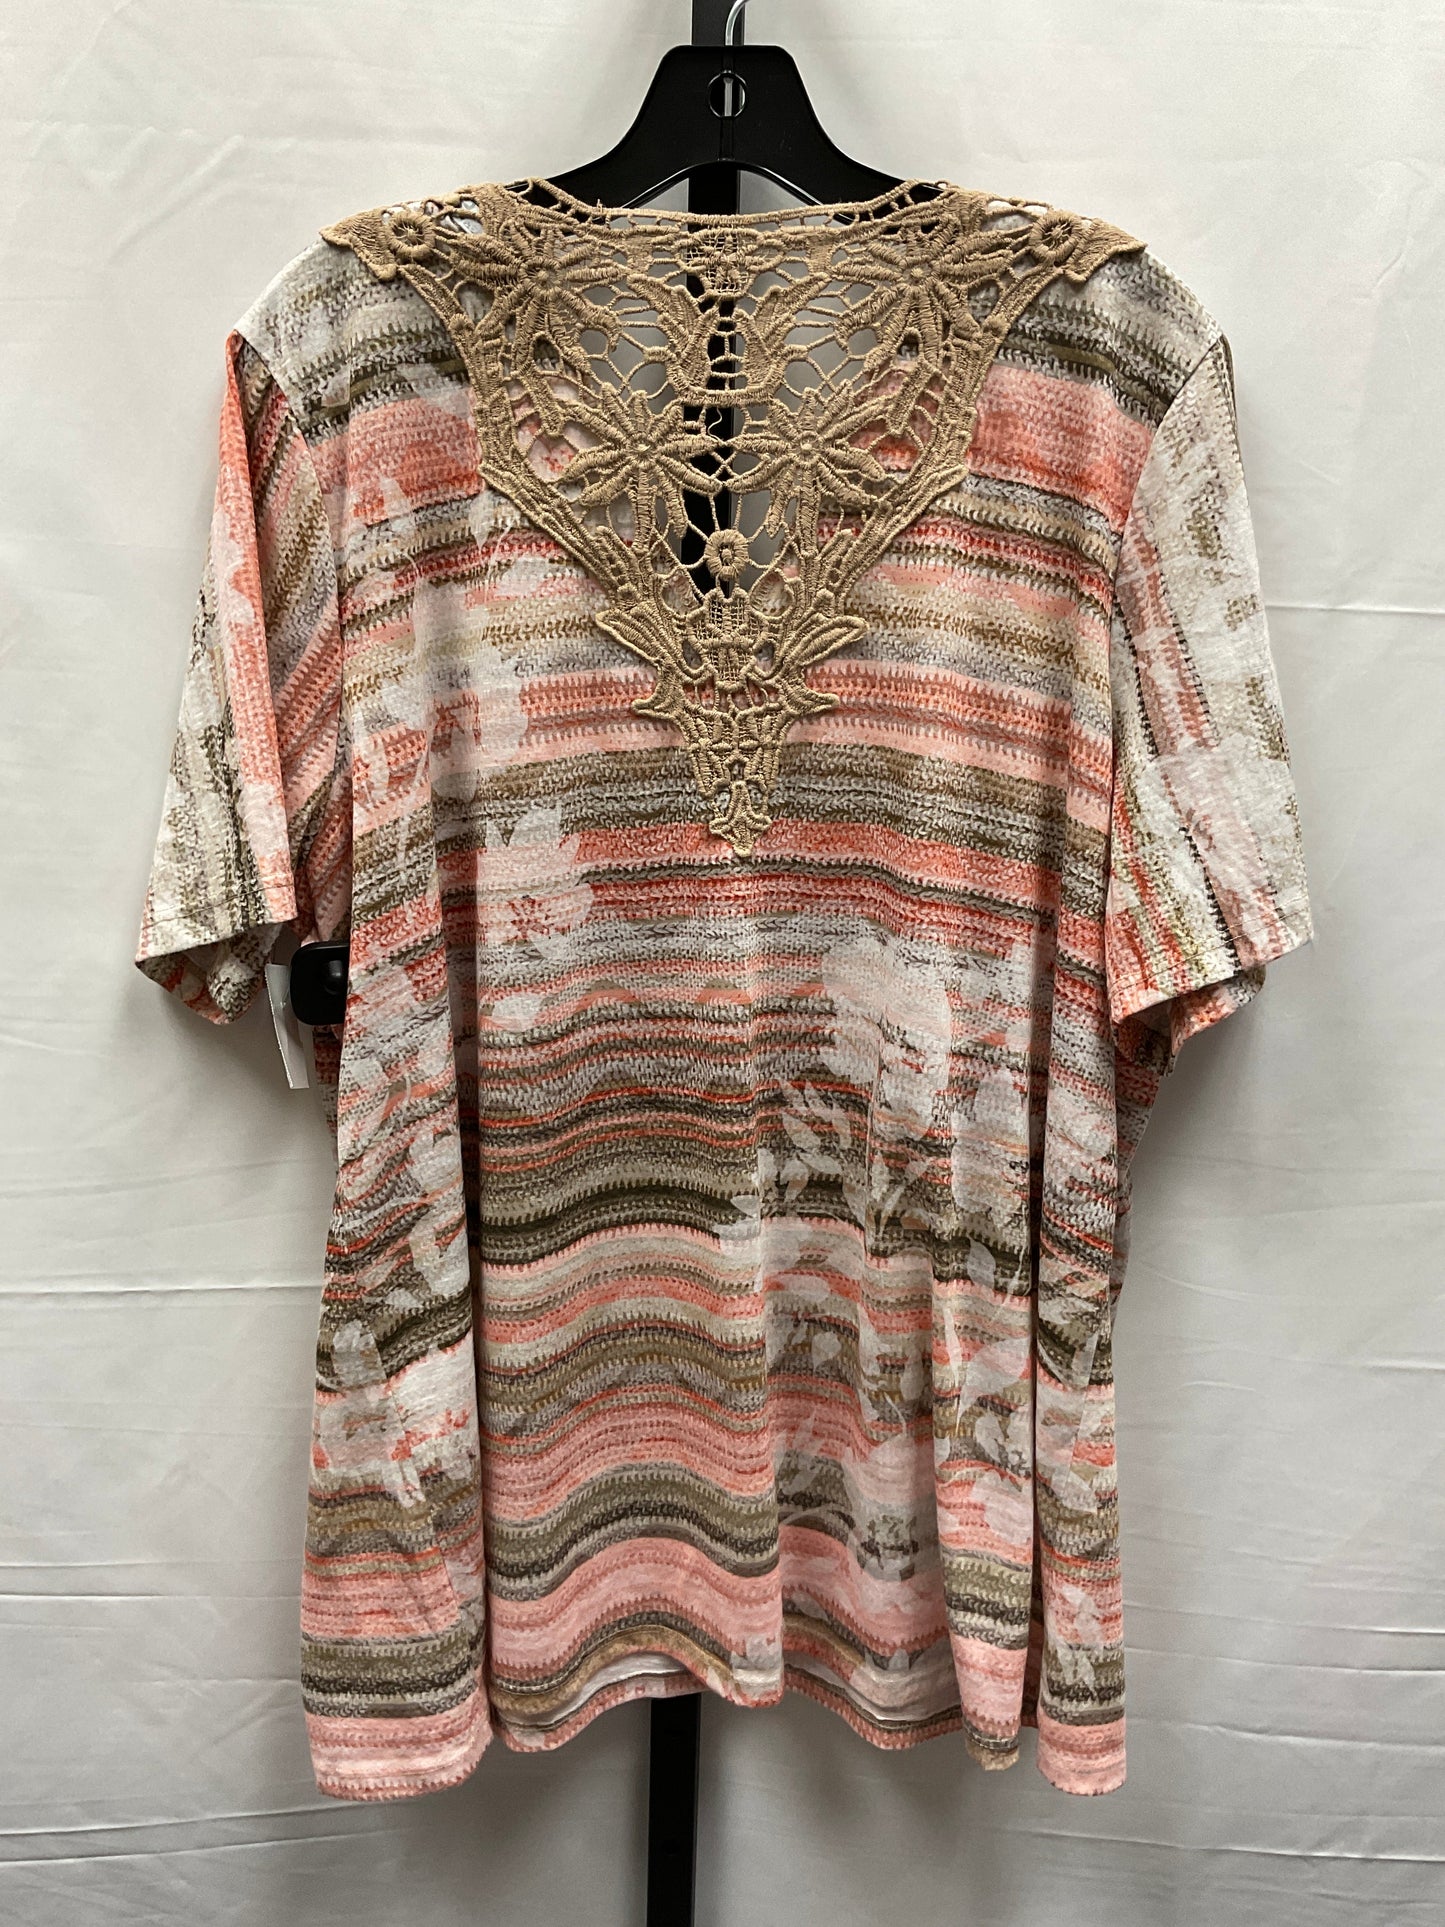 Multi-colored Top Short Sleeve Catherines, Size 1x